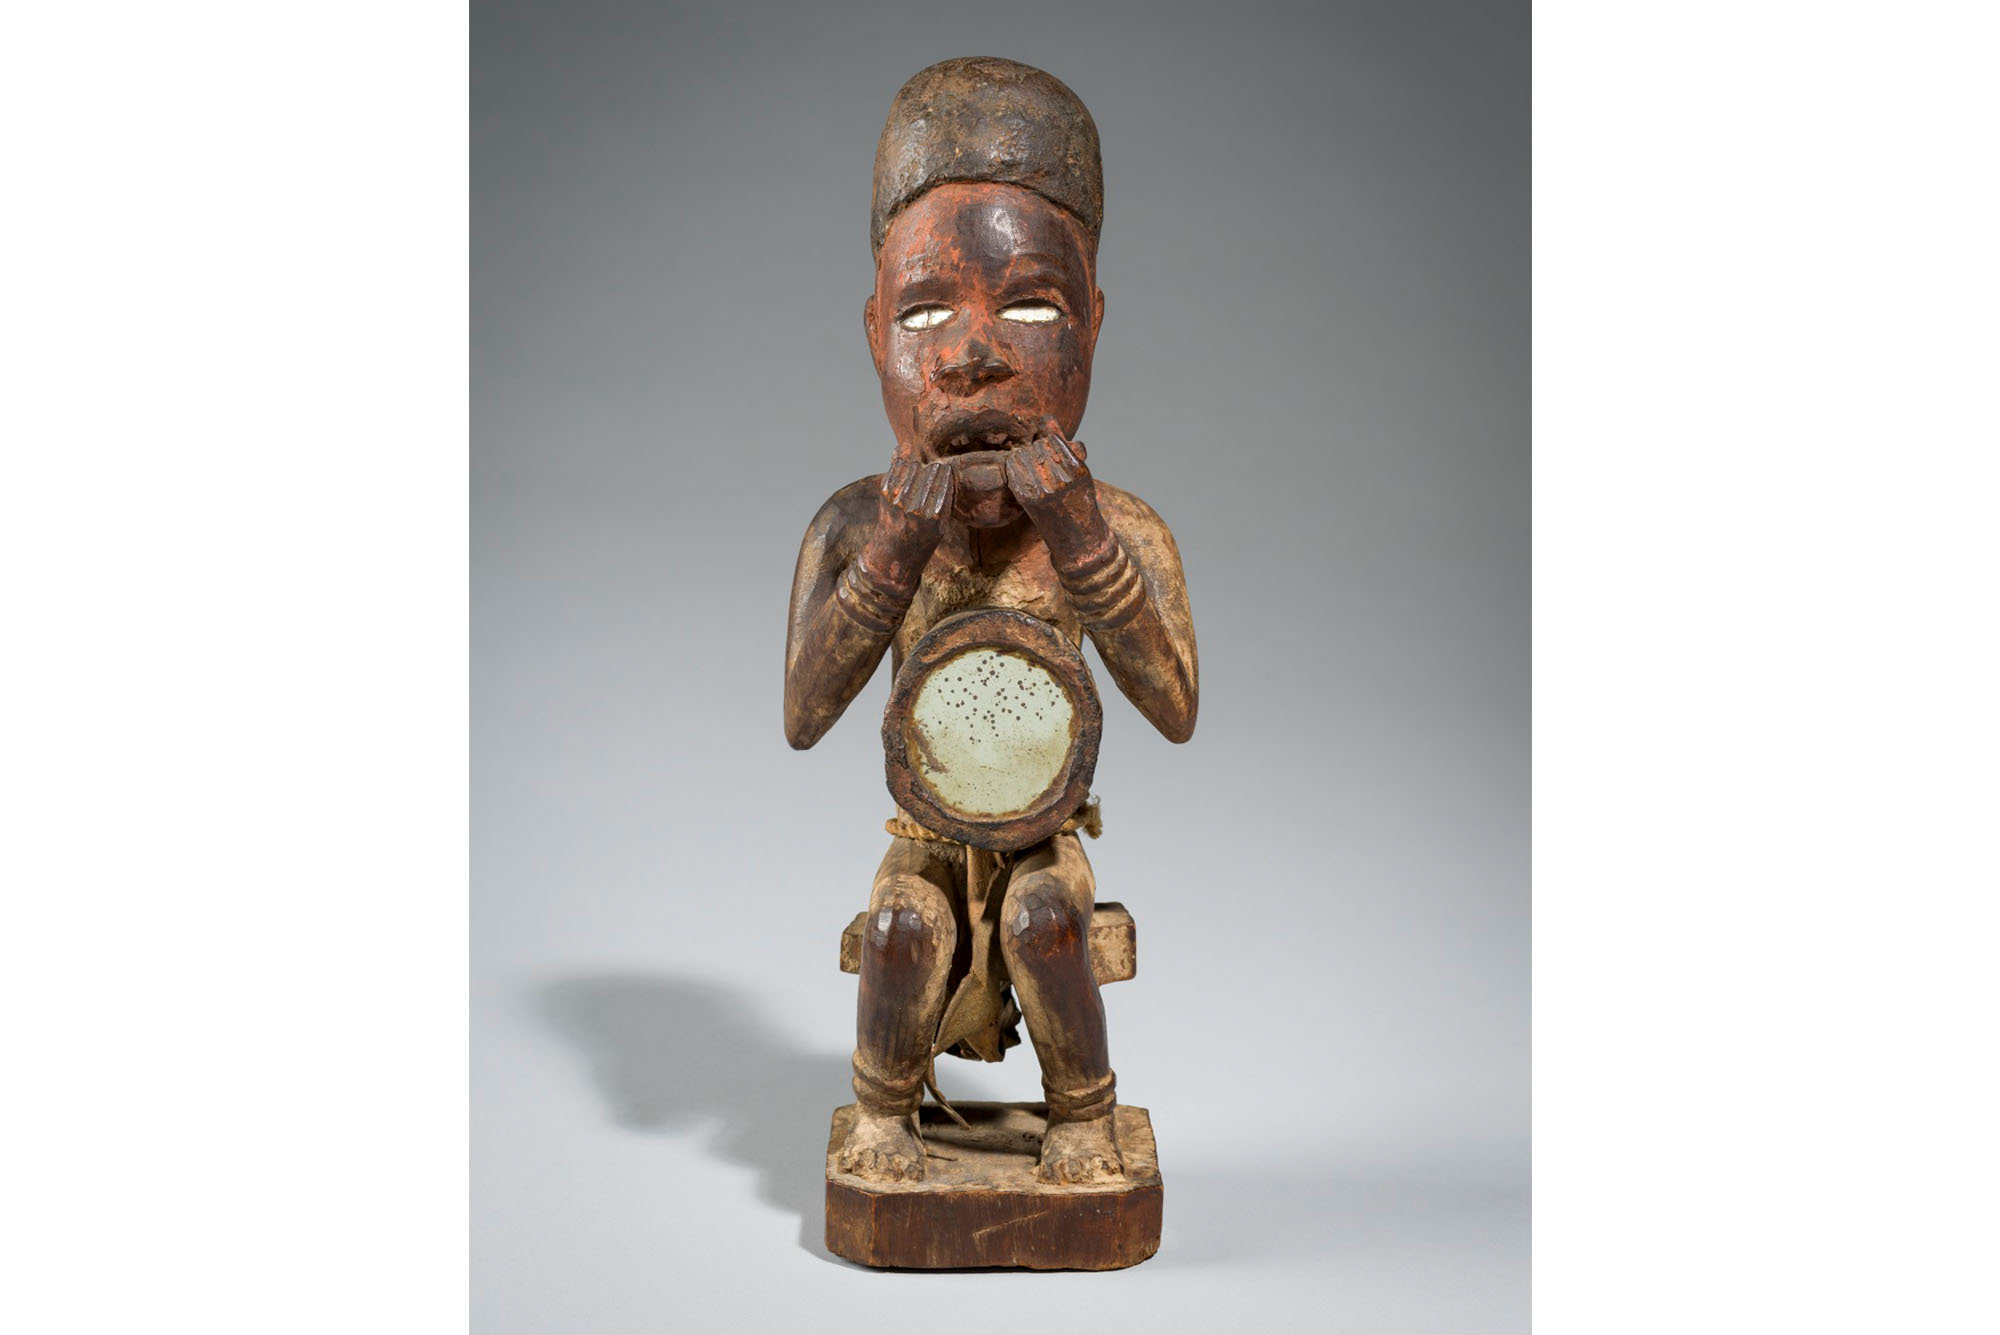 Male Nkisi Power figure, a wooden stature of an African man sitting down with his hands held up to his mouth. In his lap is a small, circular mirror